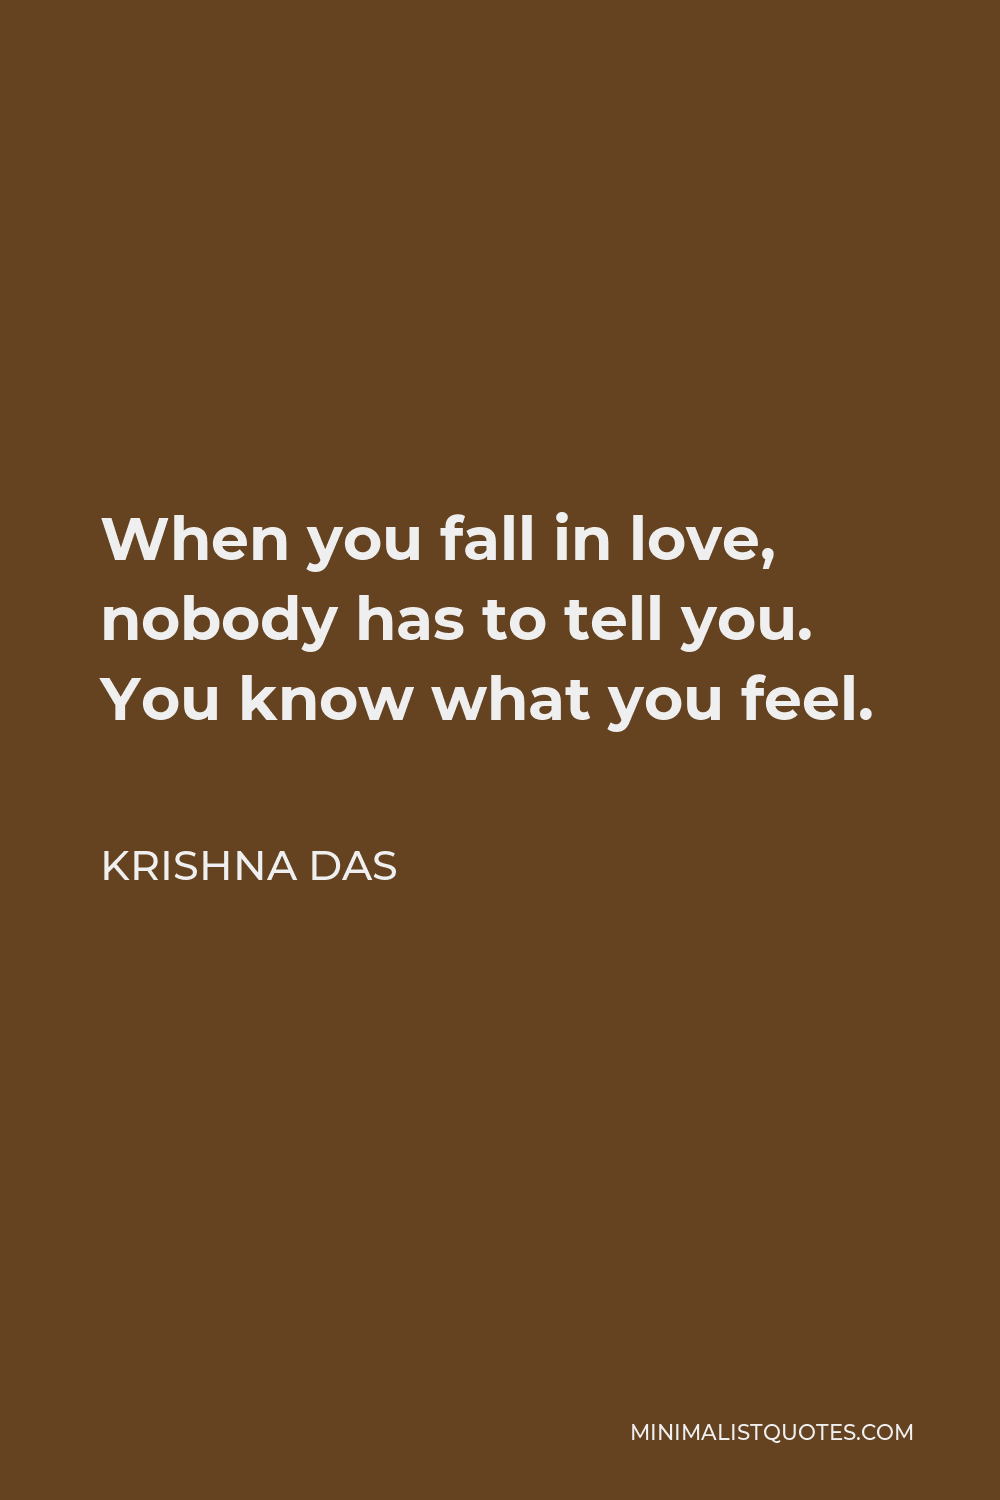 Krishna Das Quote - When you fall in love, nobody has to tell you. You know what you feel.